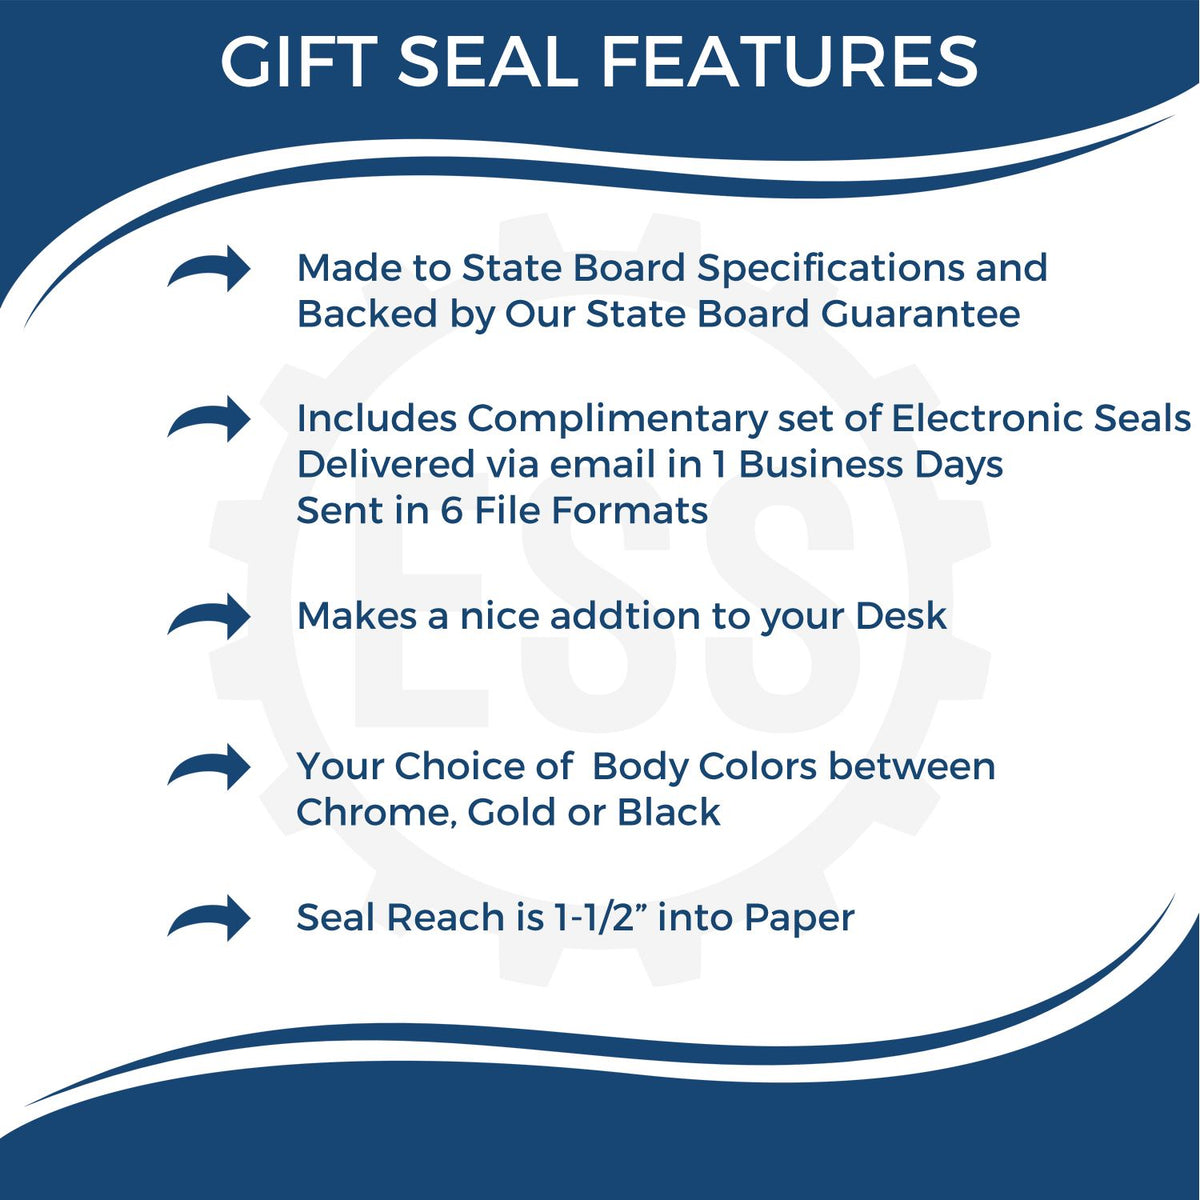 A picture of an infographic highlighting the selling points for the Gift Iowa Geologist Seal